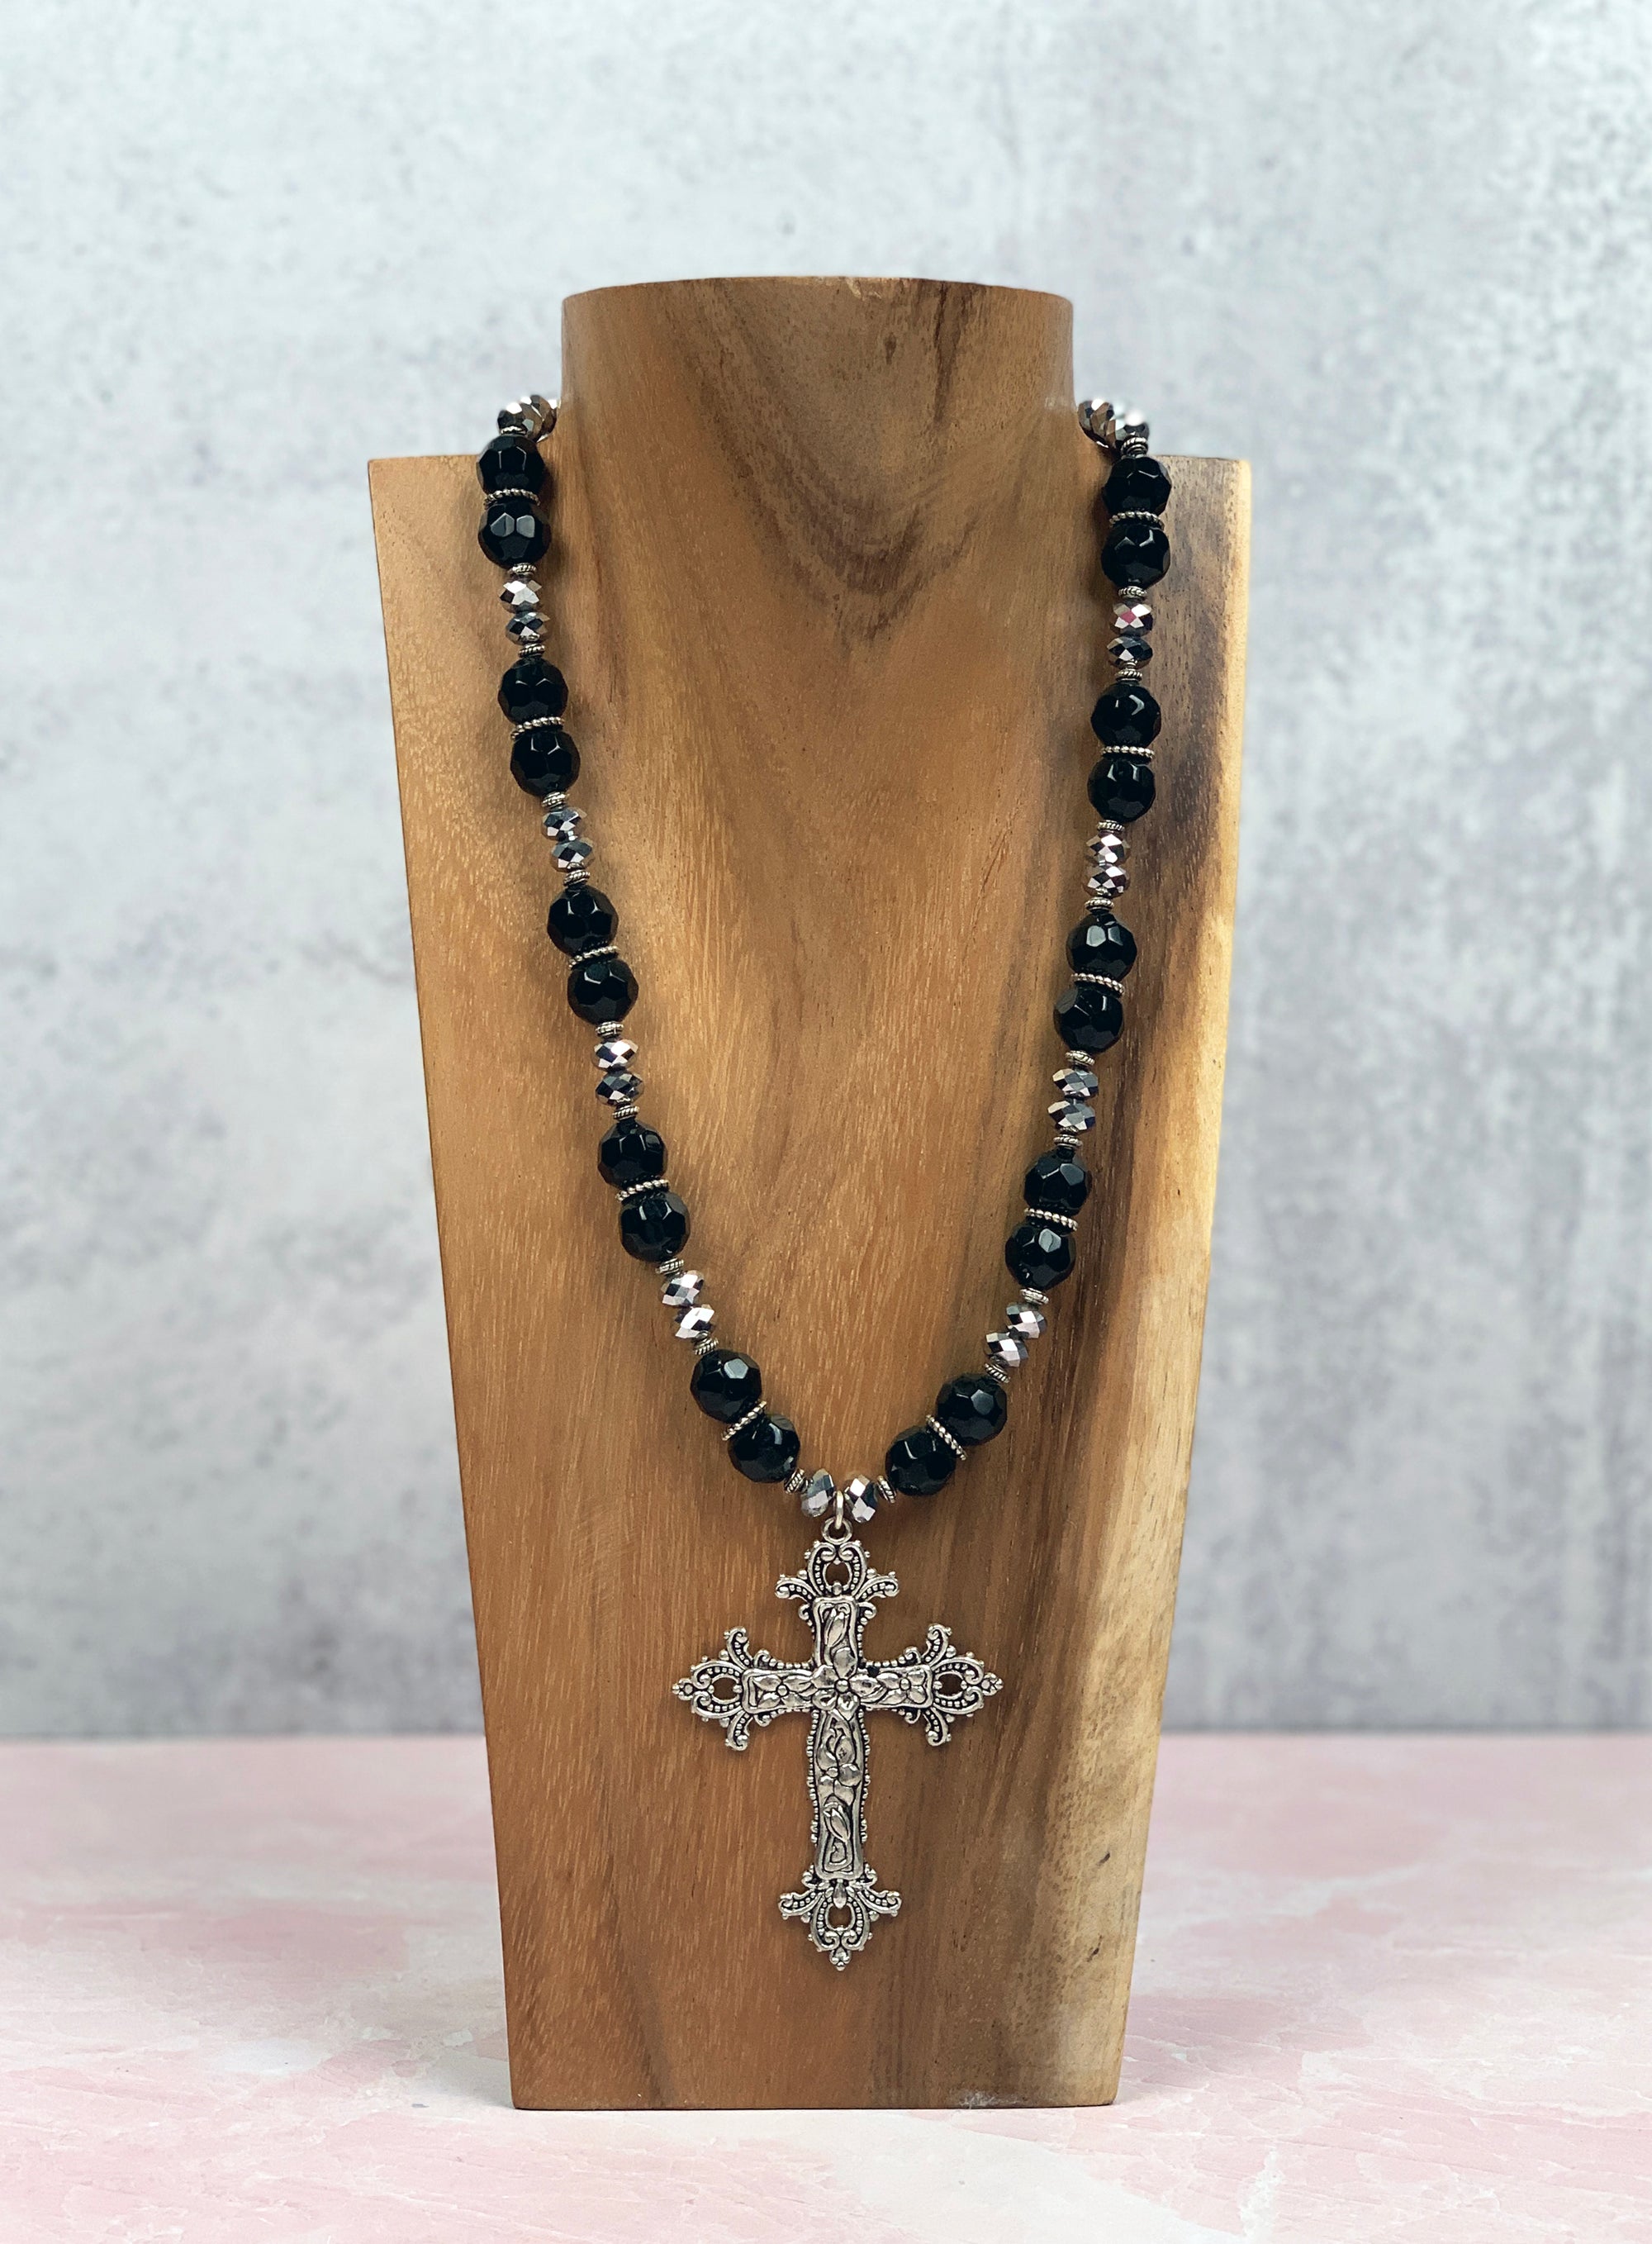 Black and Silver Glass Beads with Ornate Cross Necklace